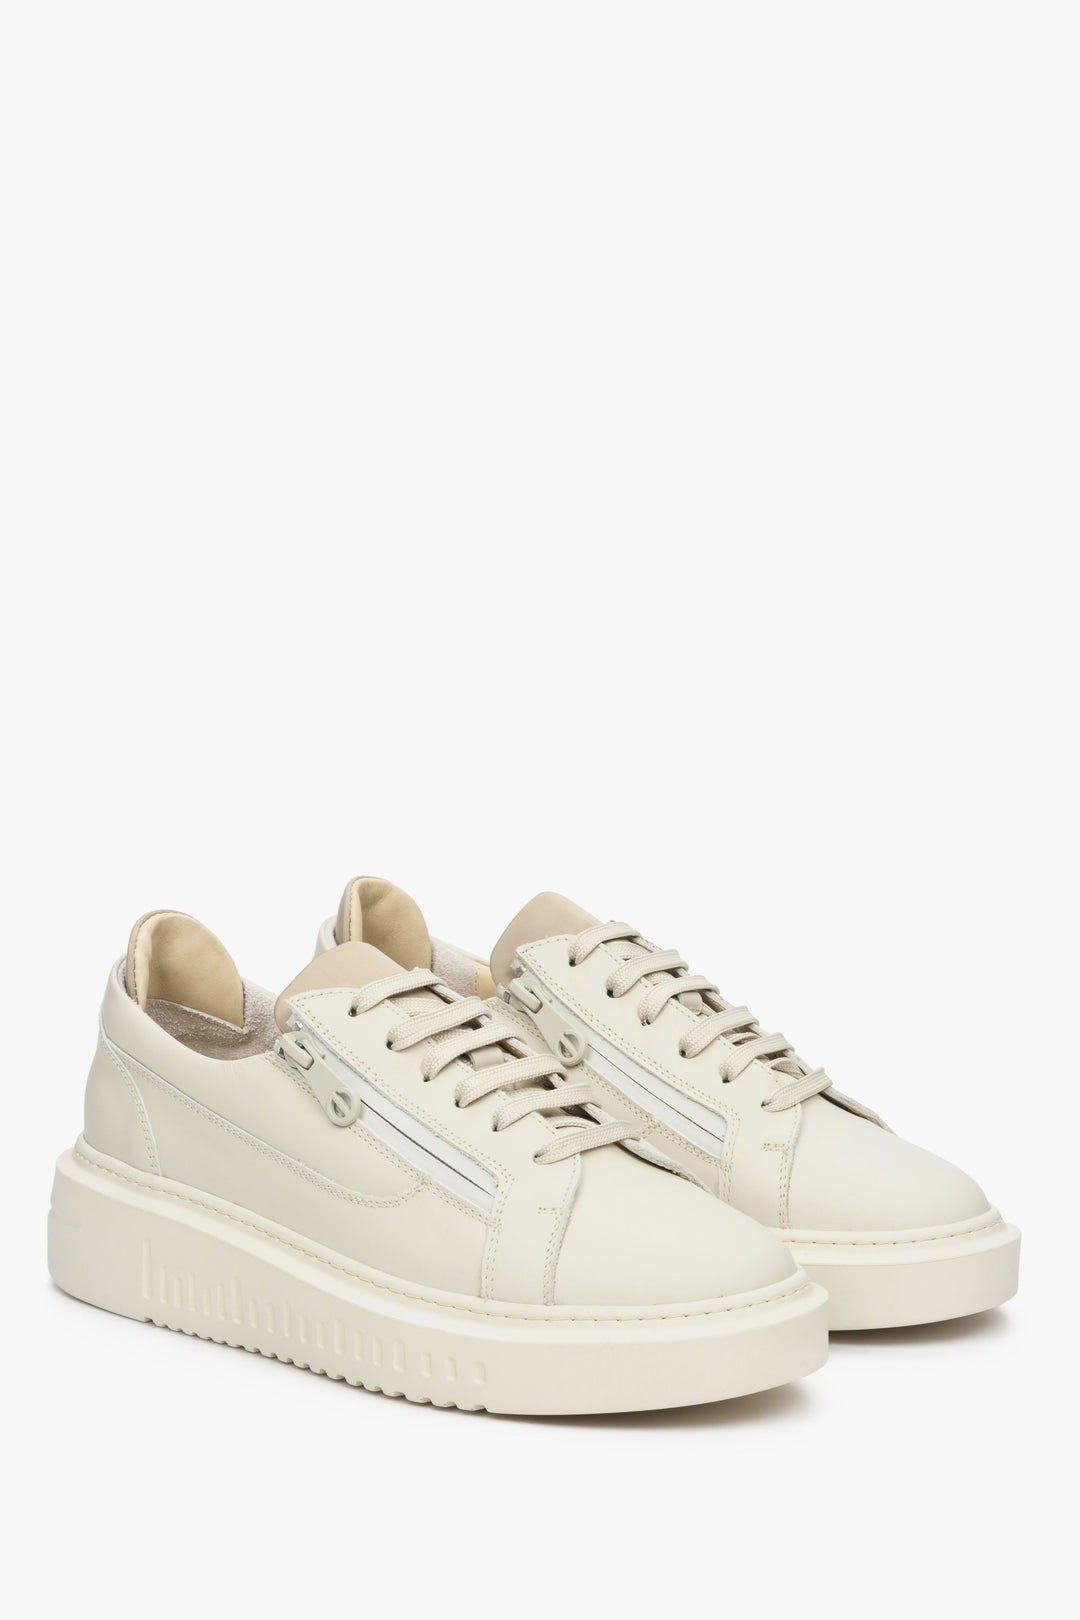 Leather, women's beige sneakers by Estro with laces and decorative zipper - presentation of the shoe's toe and side seam.